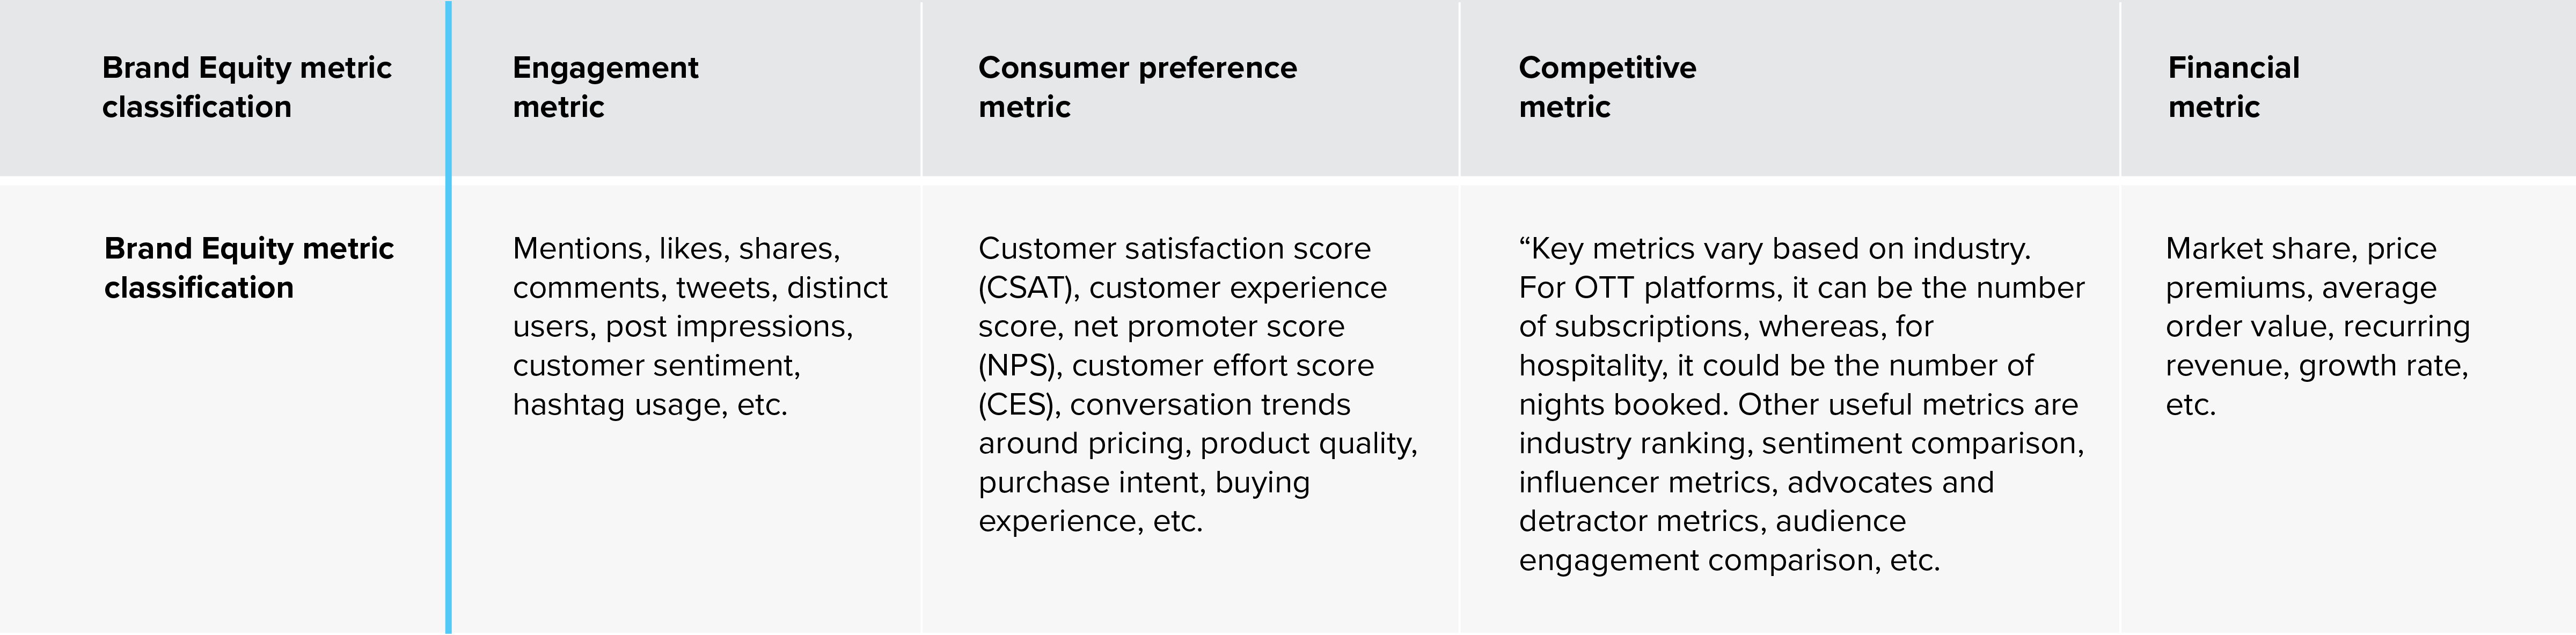 A table showing different types of brand equity metrics with examples